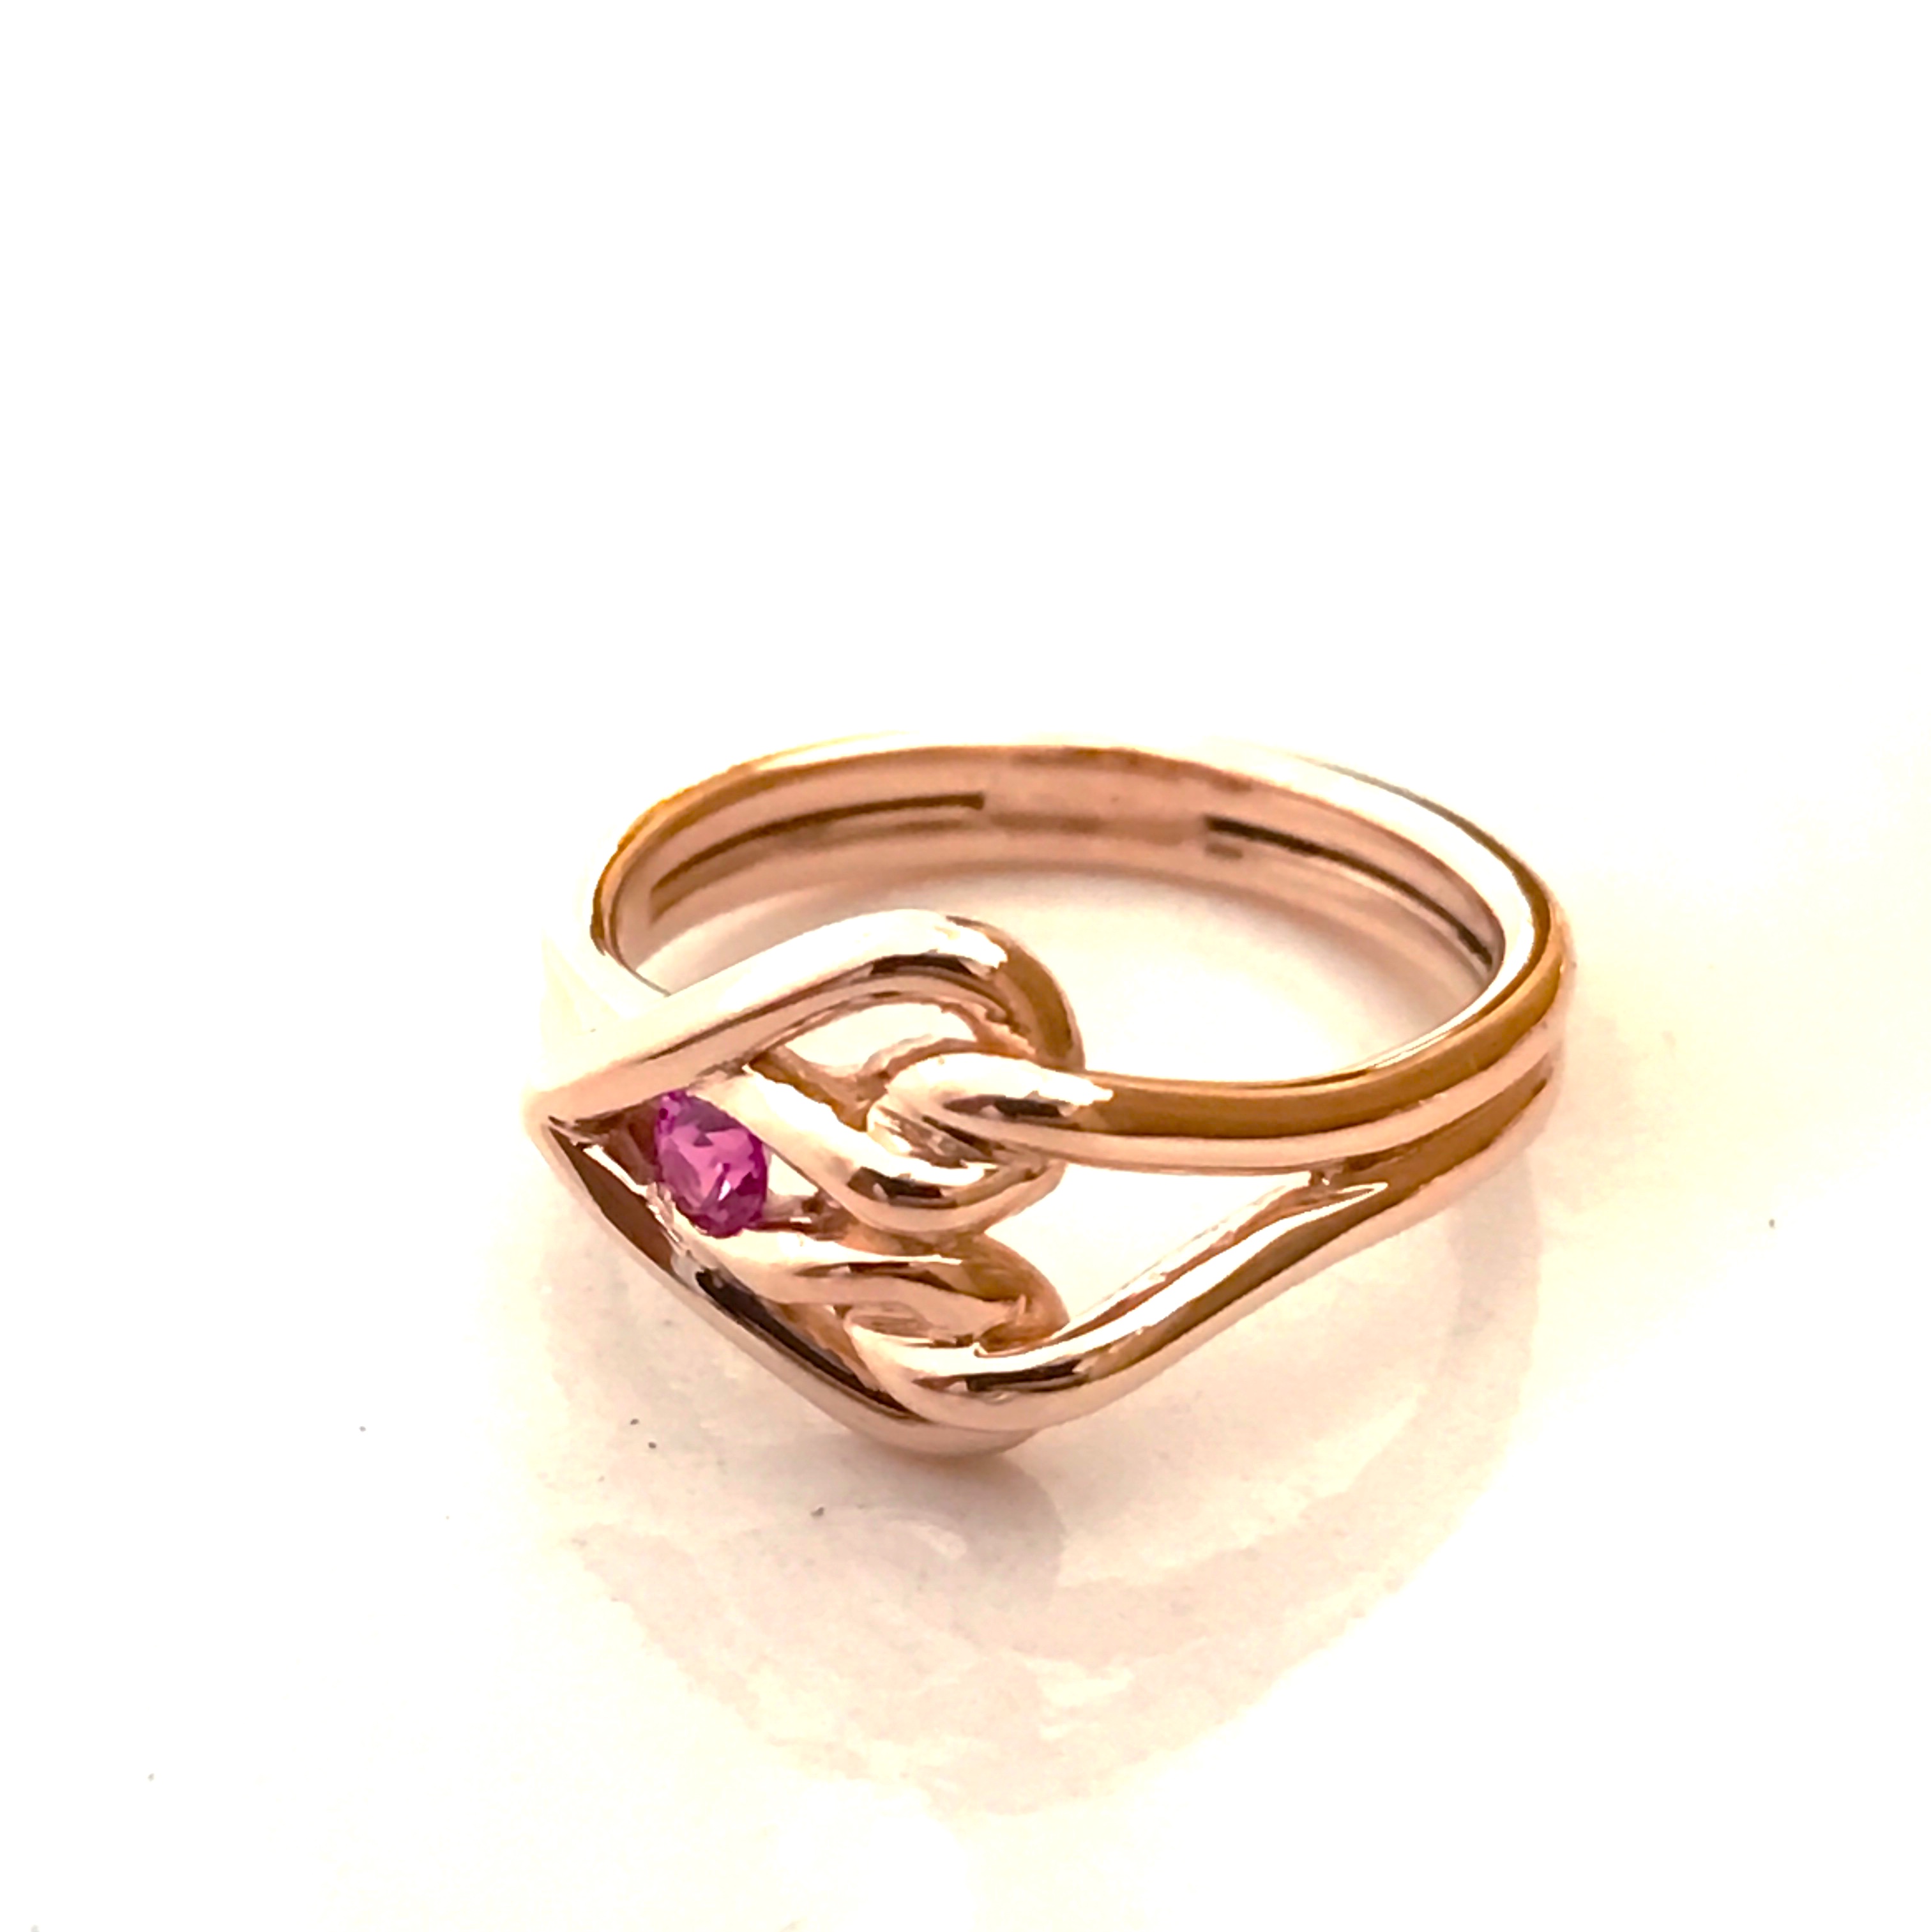 14 Kt Rose Gold Heart Love Knot Custom Ring From Our Exclusive Plymouth Knot Collection